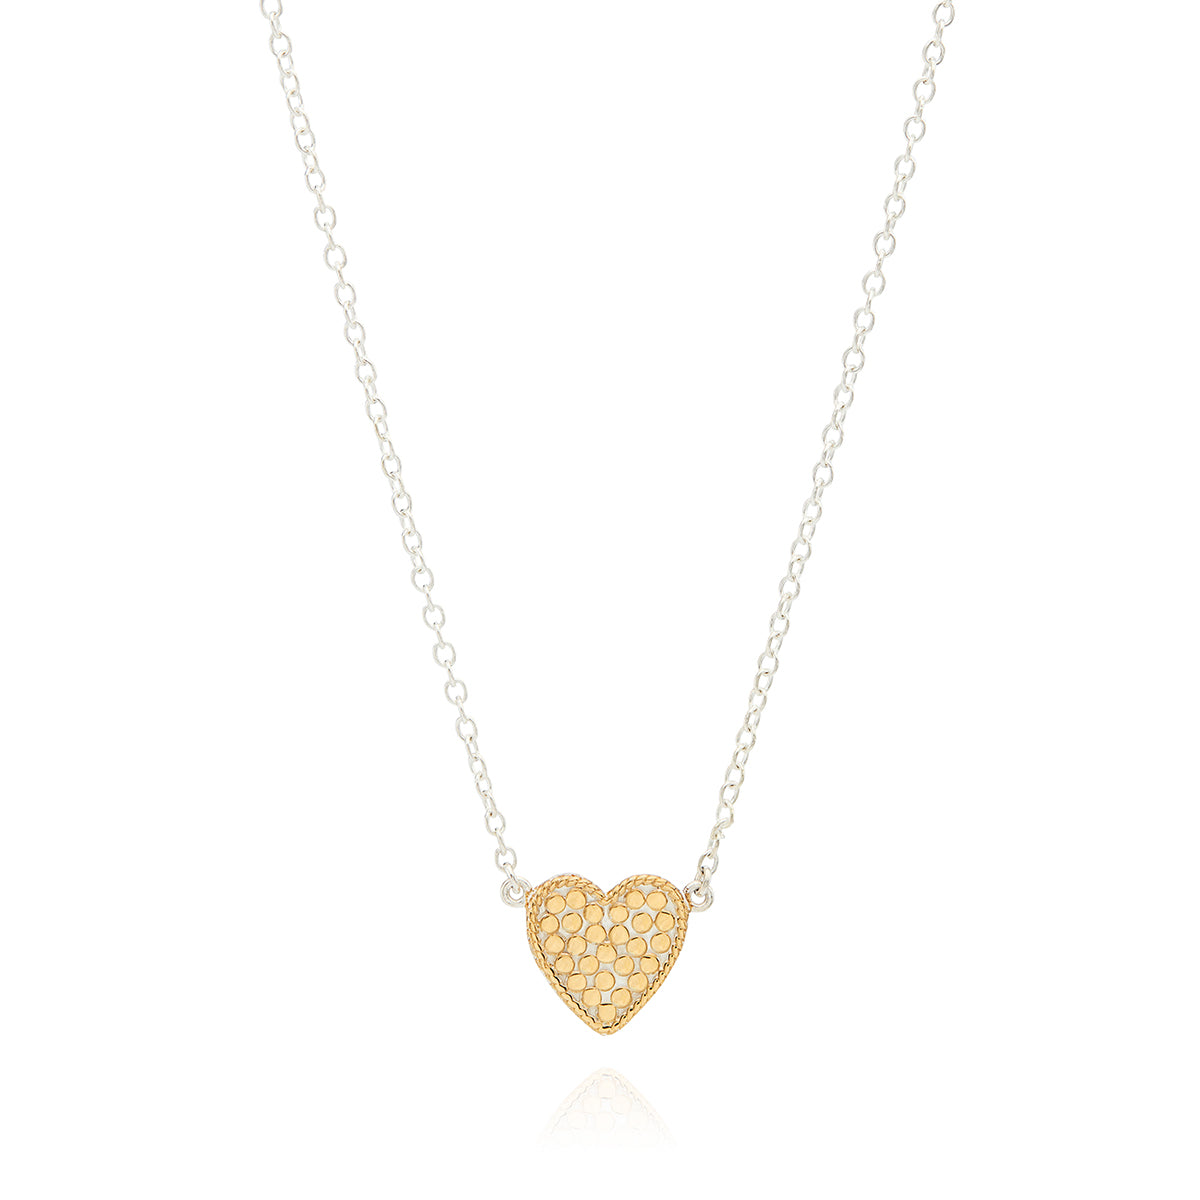 Engravable Heart Charity Necklace